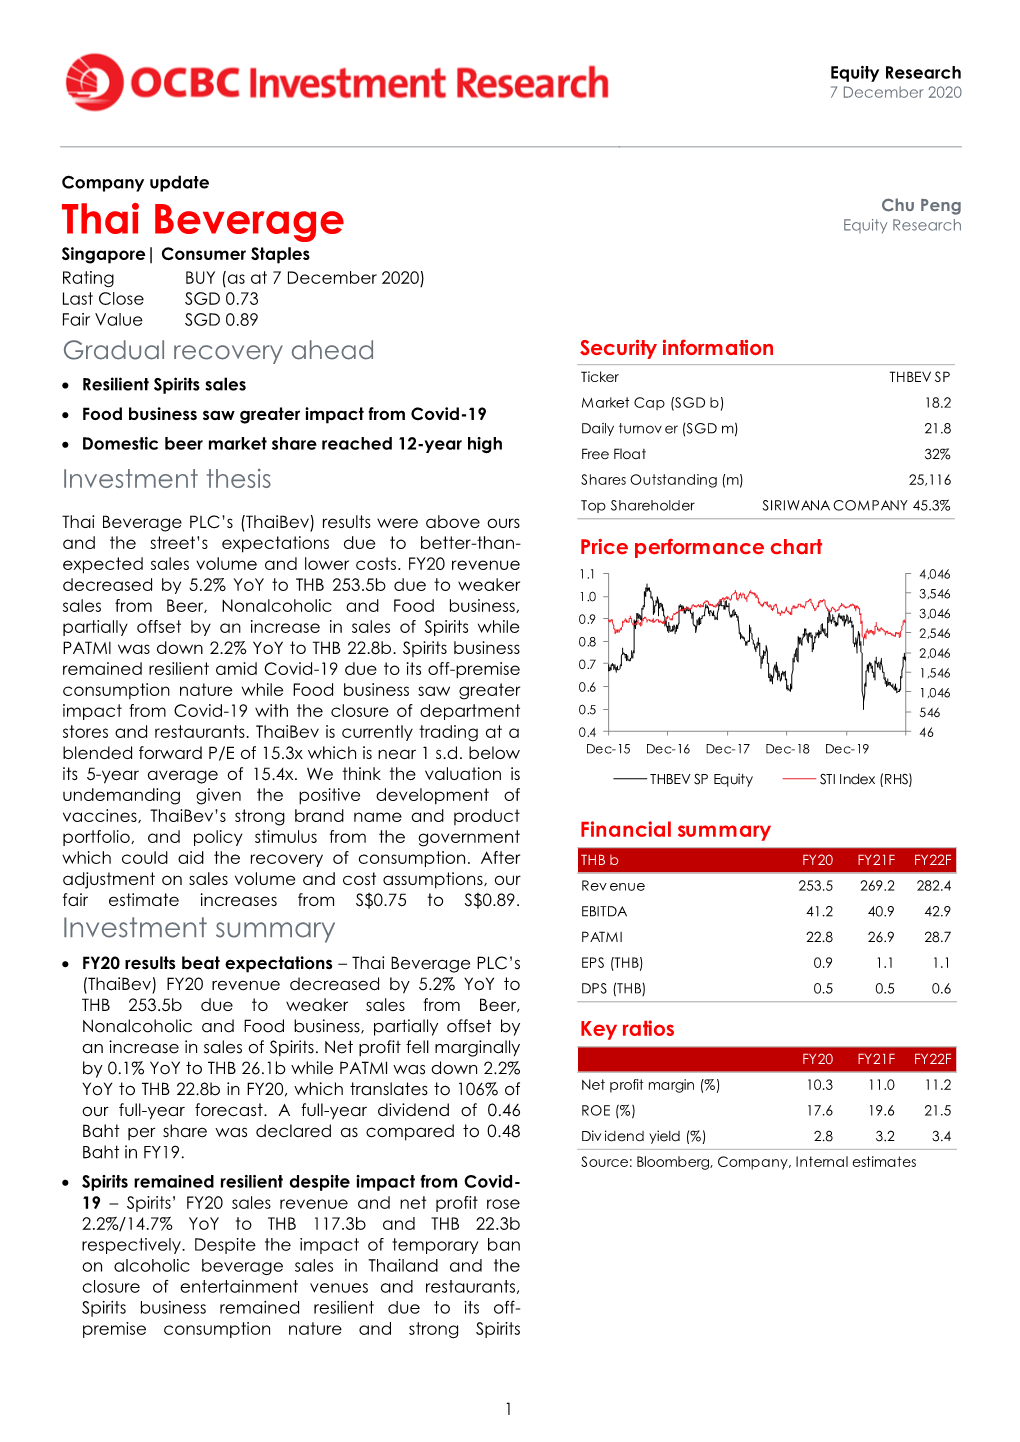 Thai Beverage Equity Research Singapore| Consumer Staples Rating BUY (As at 7 December 2020) Last Close SGD 0.73 Fair Value SGD 0.89